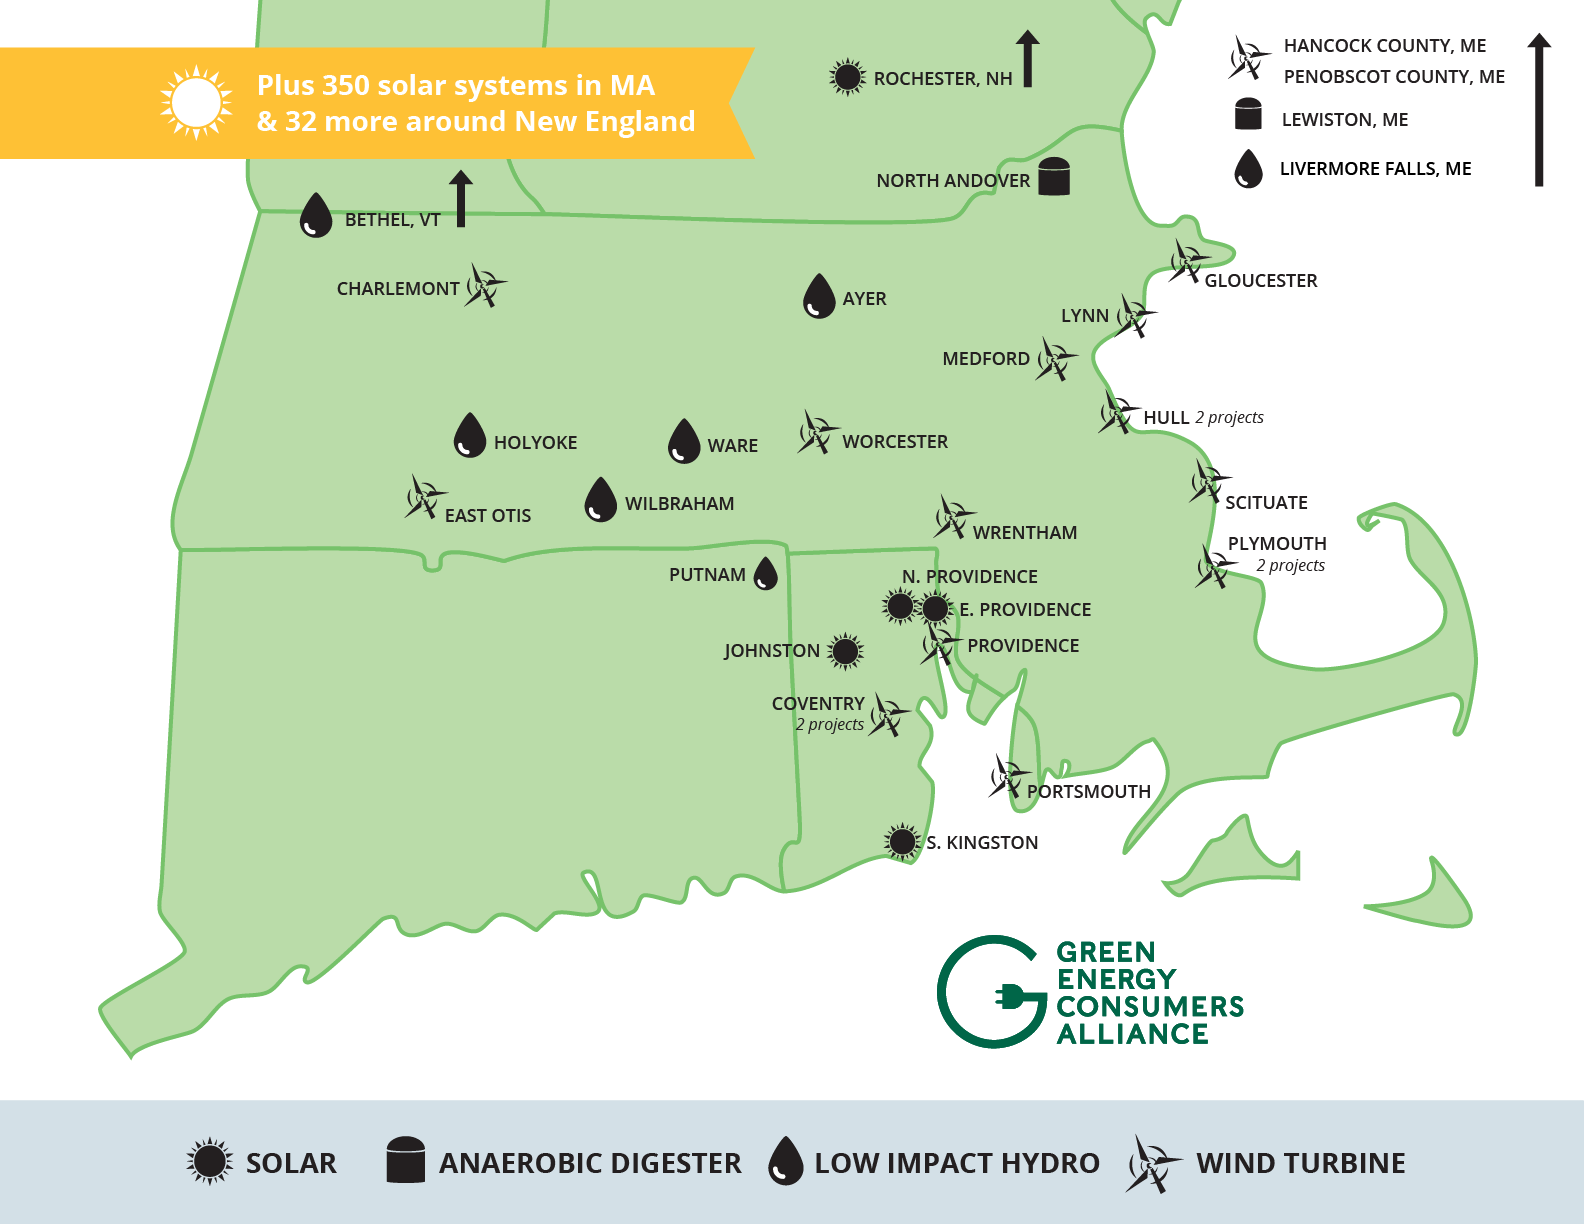 Green Energy Consumers green power resource map